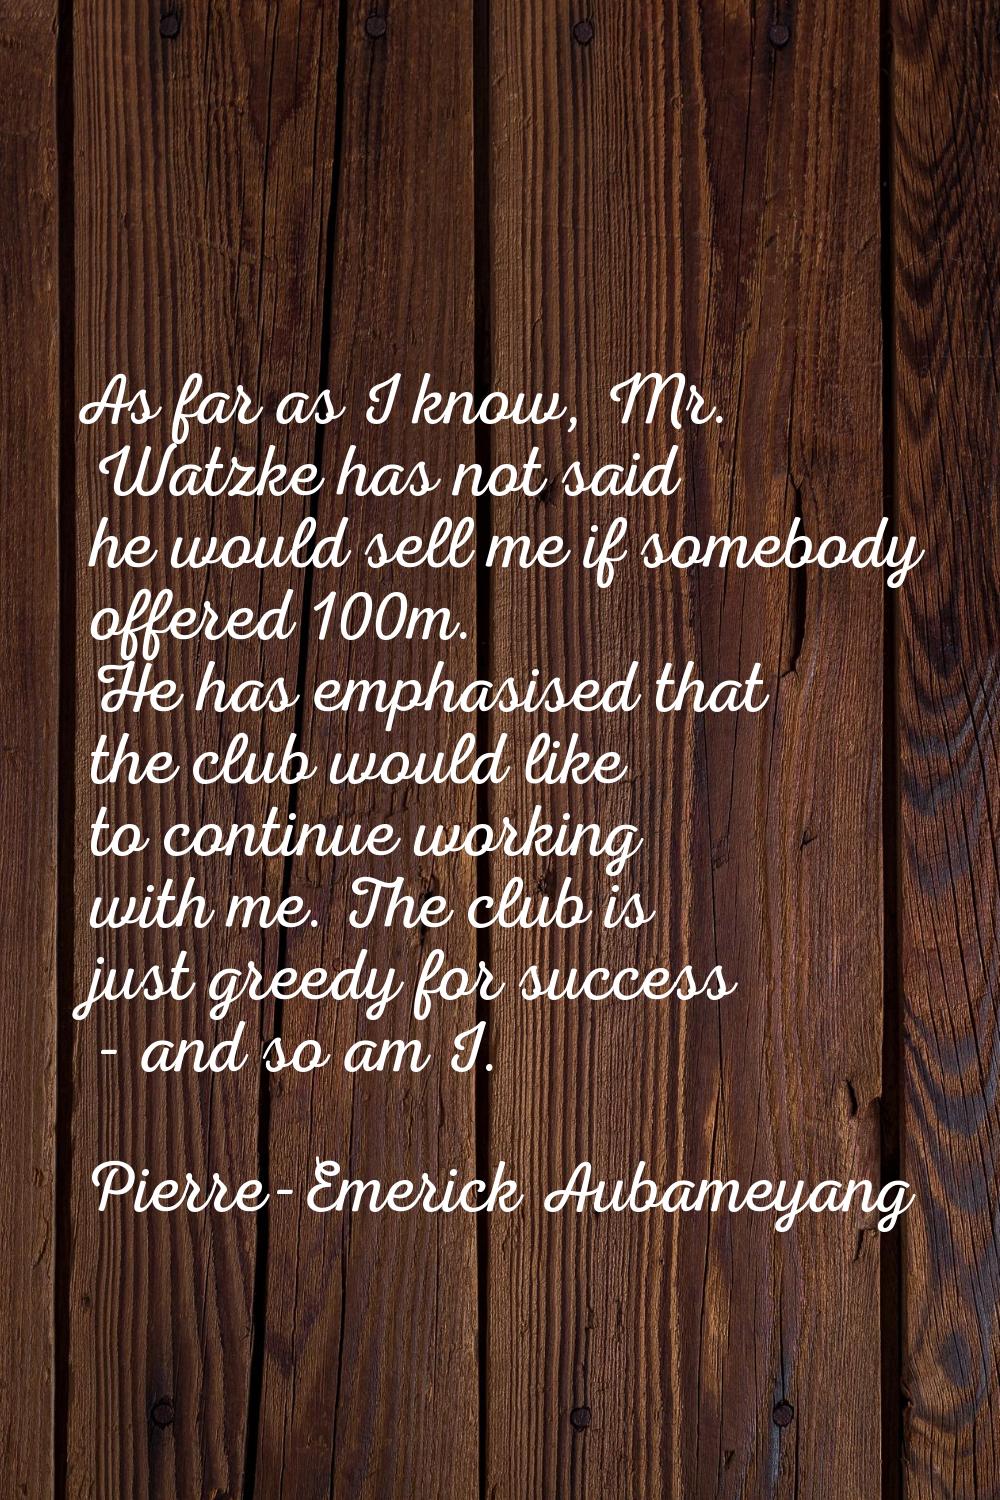 As far as I know, Mr. Watzke has not said he would sell me if somebody offered 100m. He has emphasi